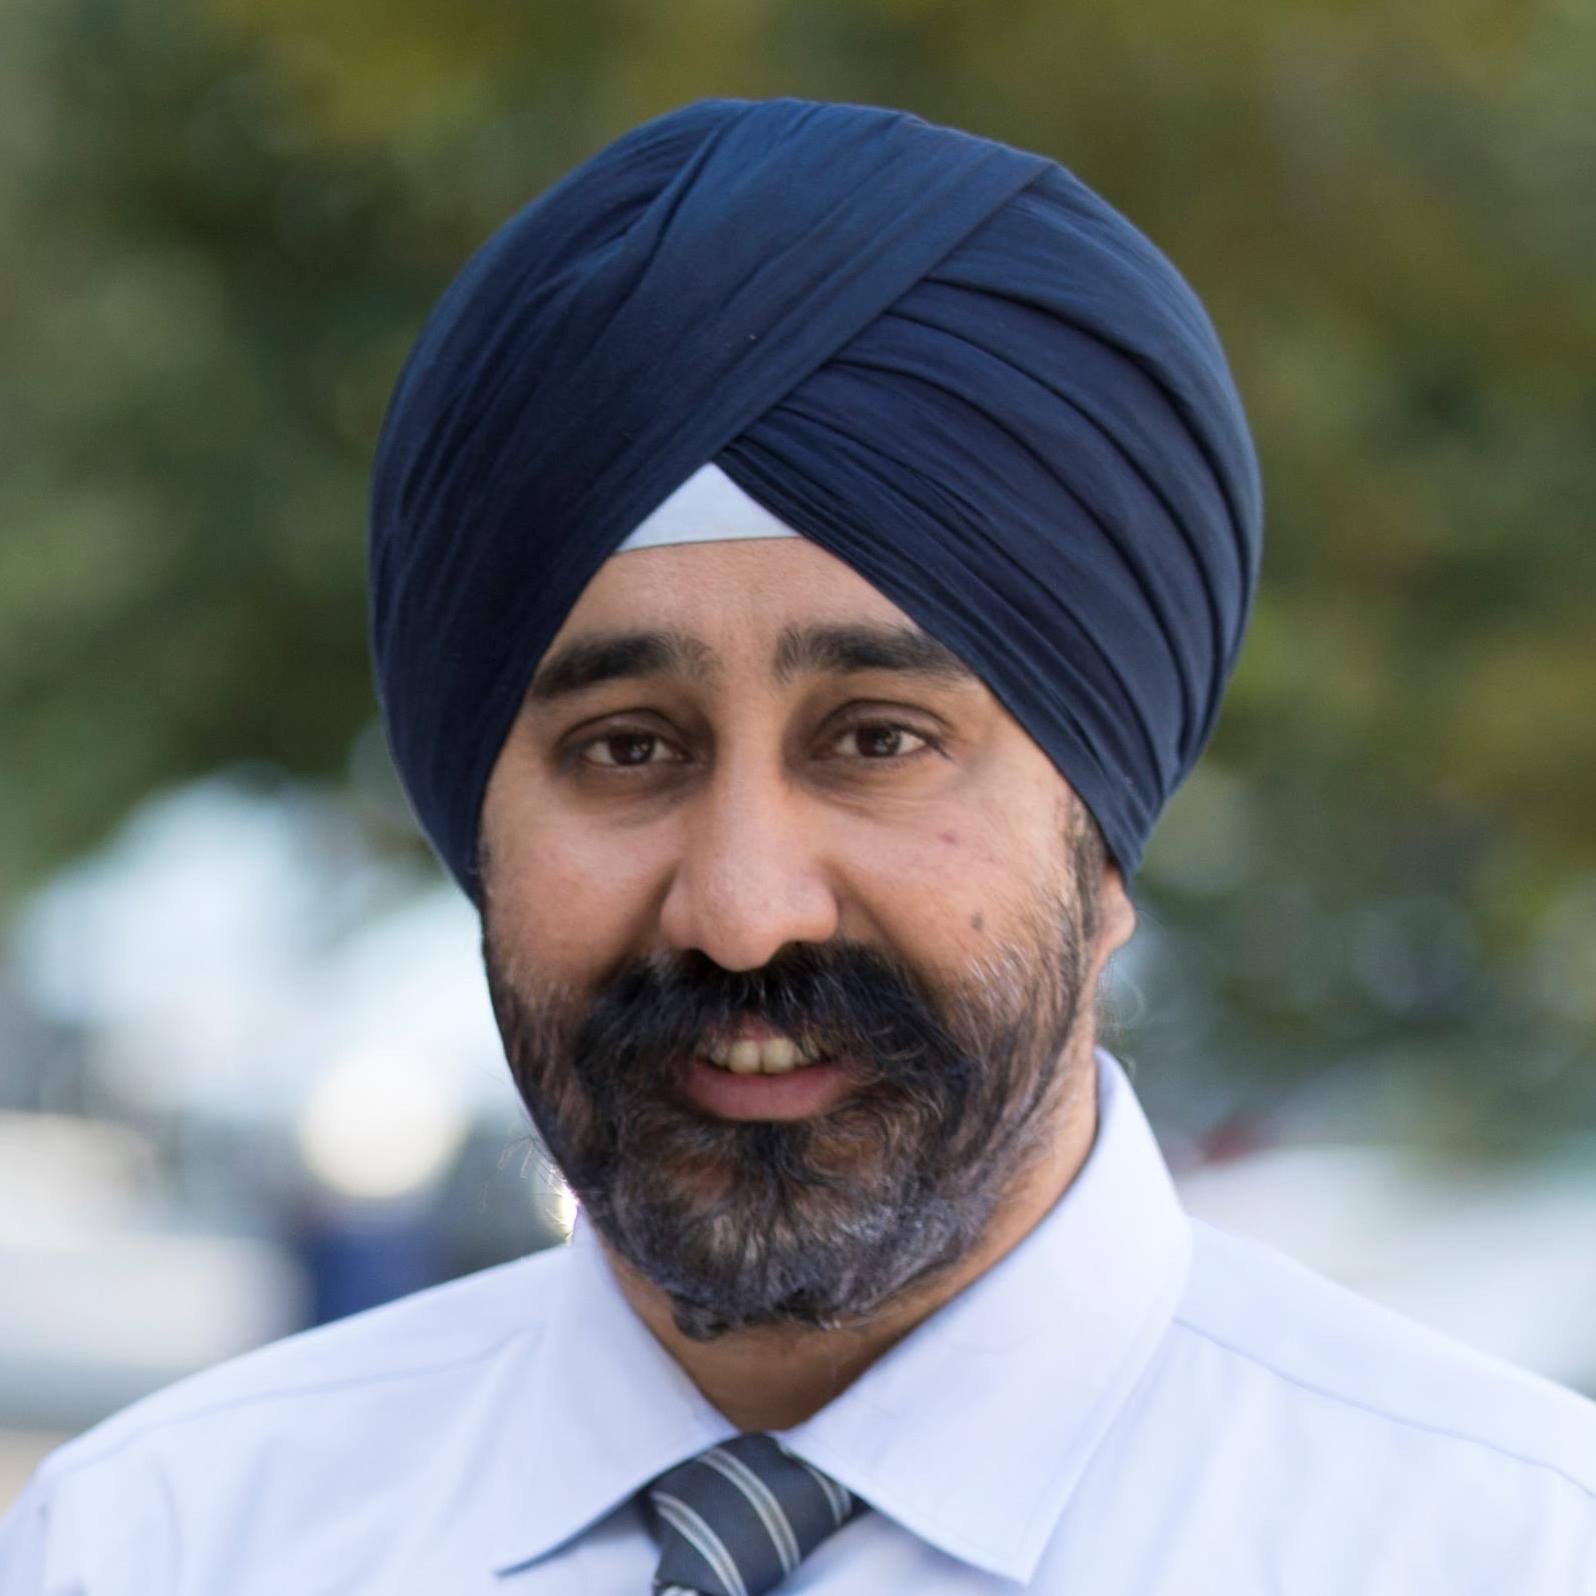 Bhalla For Congress Introduces Campaign Manager and Consulting Team – Insider NJ